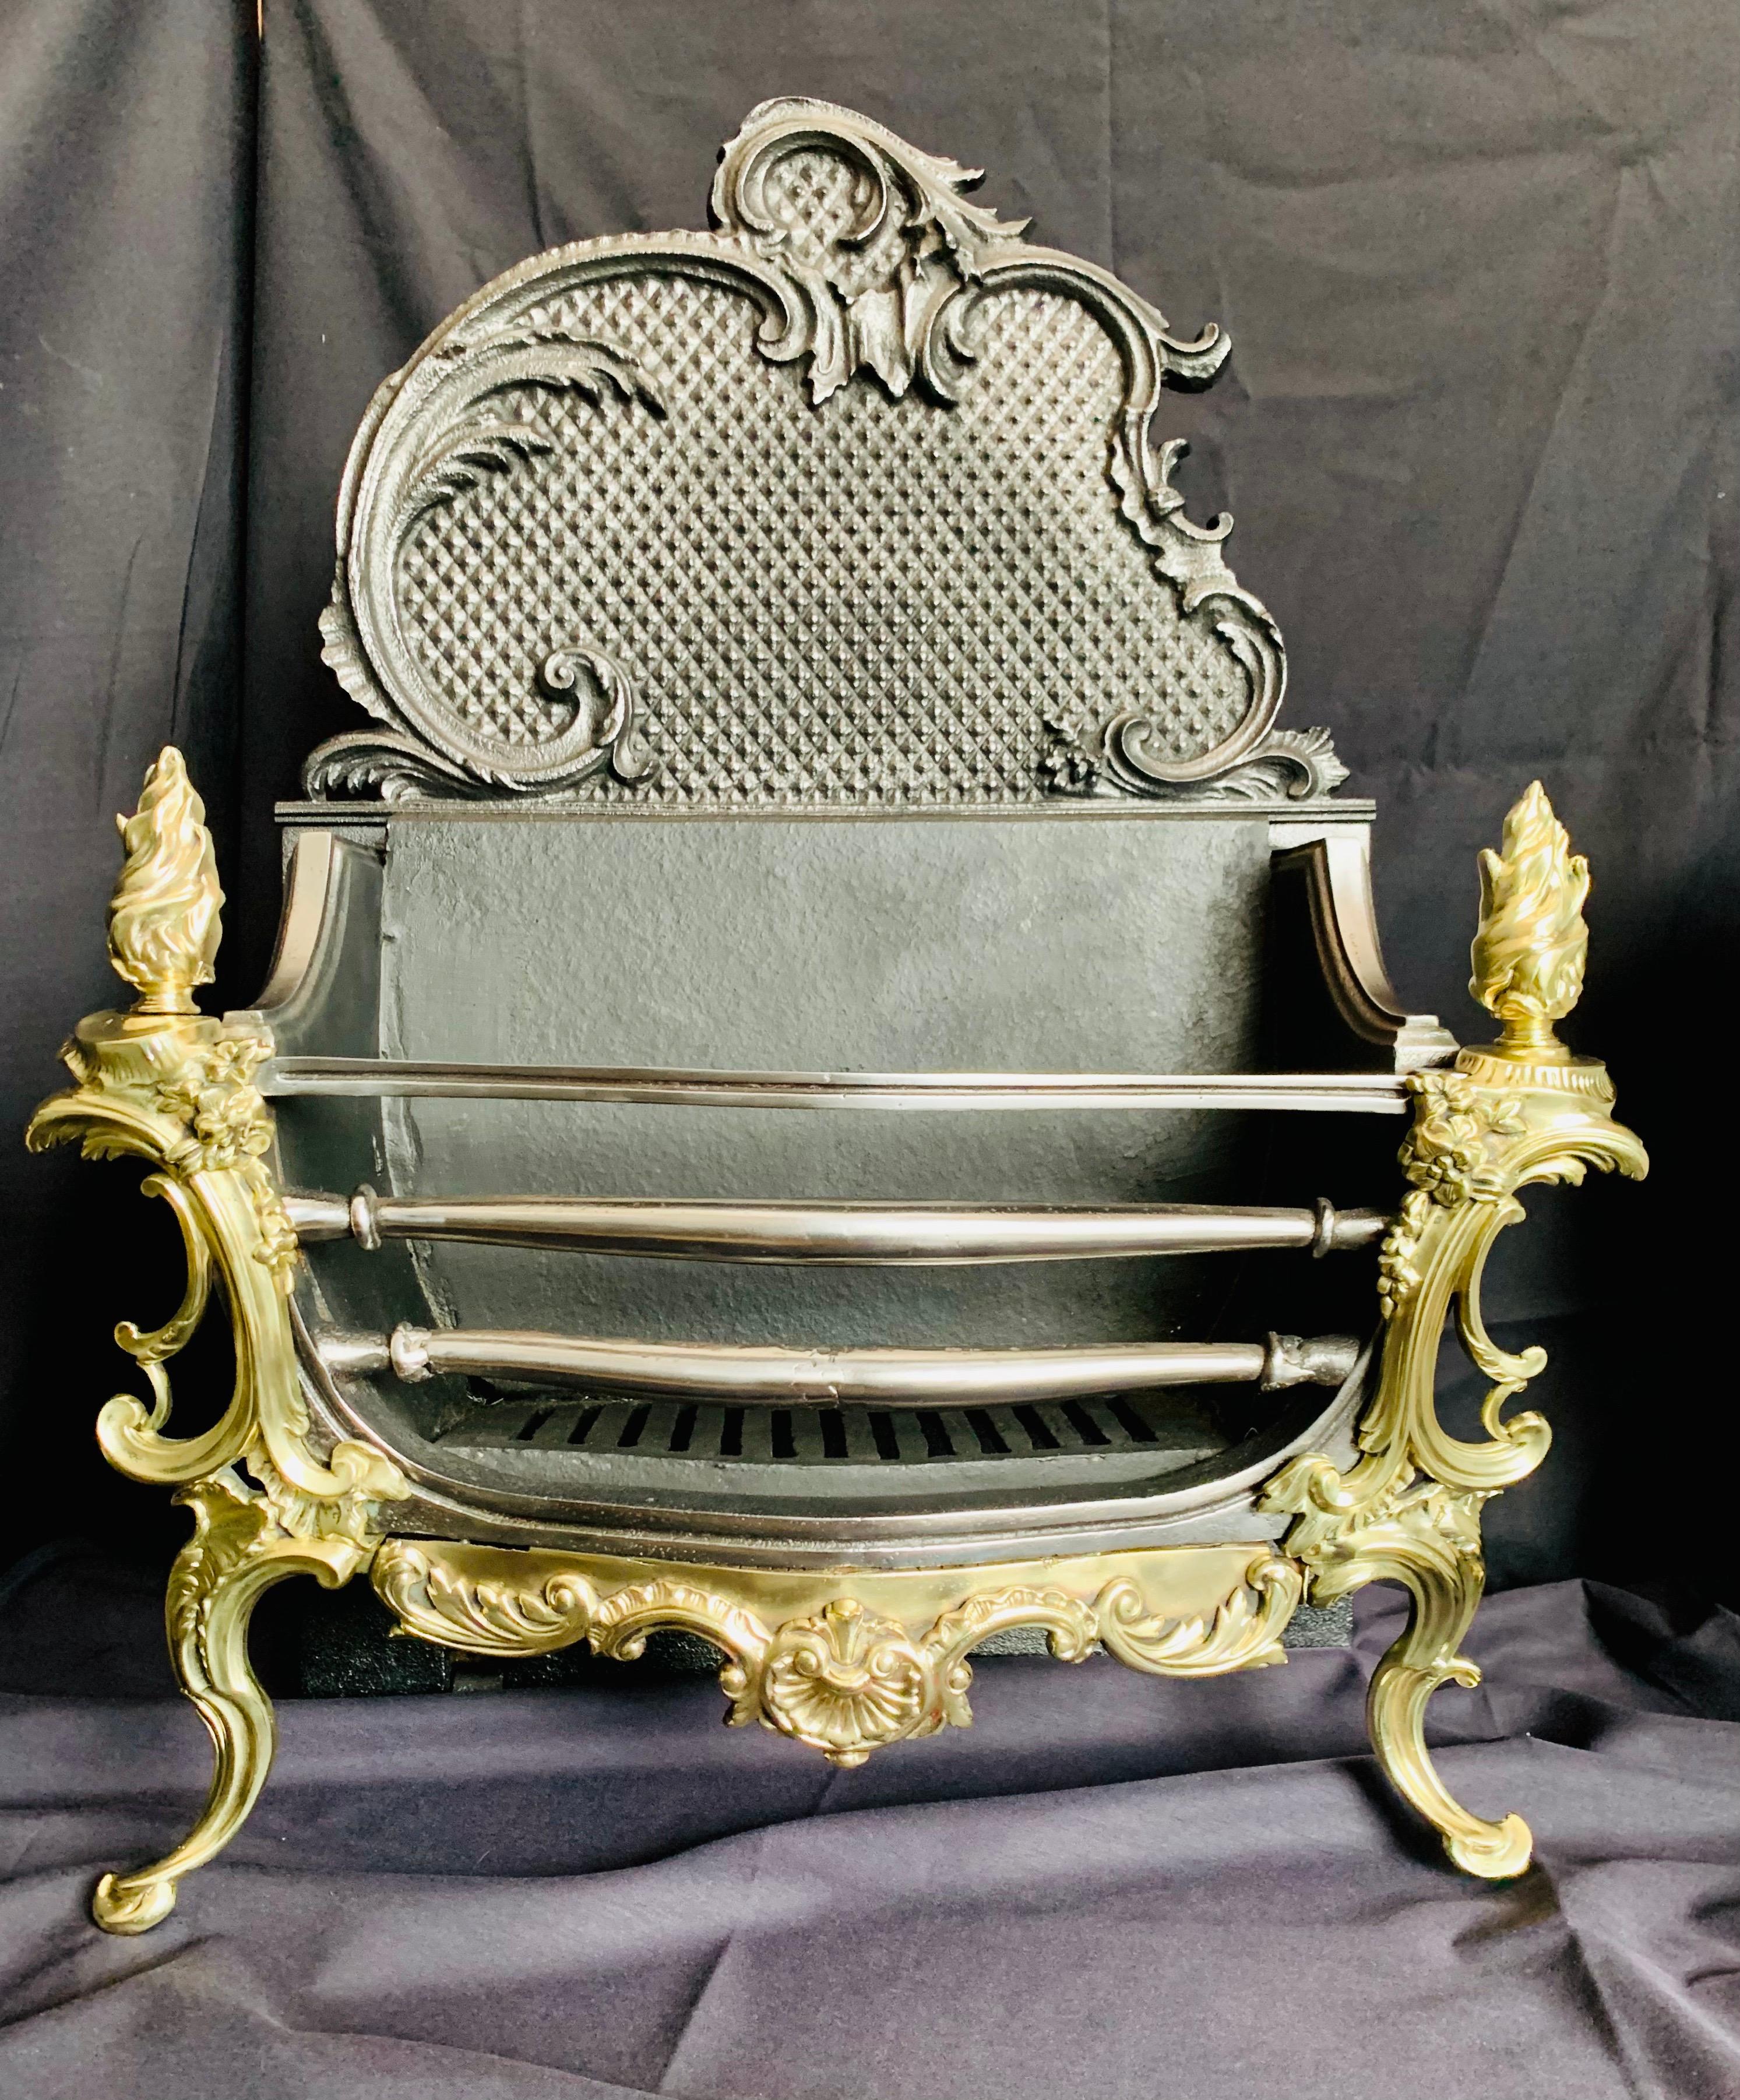 A very attractive 19th century Victorian French Rococo style brass and iron fire grate, with a polished three barred front above an ornate scrolled high arched backplate, twin flaming brass finials and a pair of elaborate scrolled legs linked by a